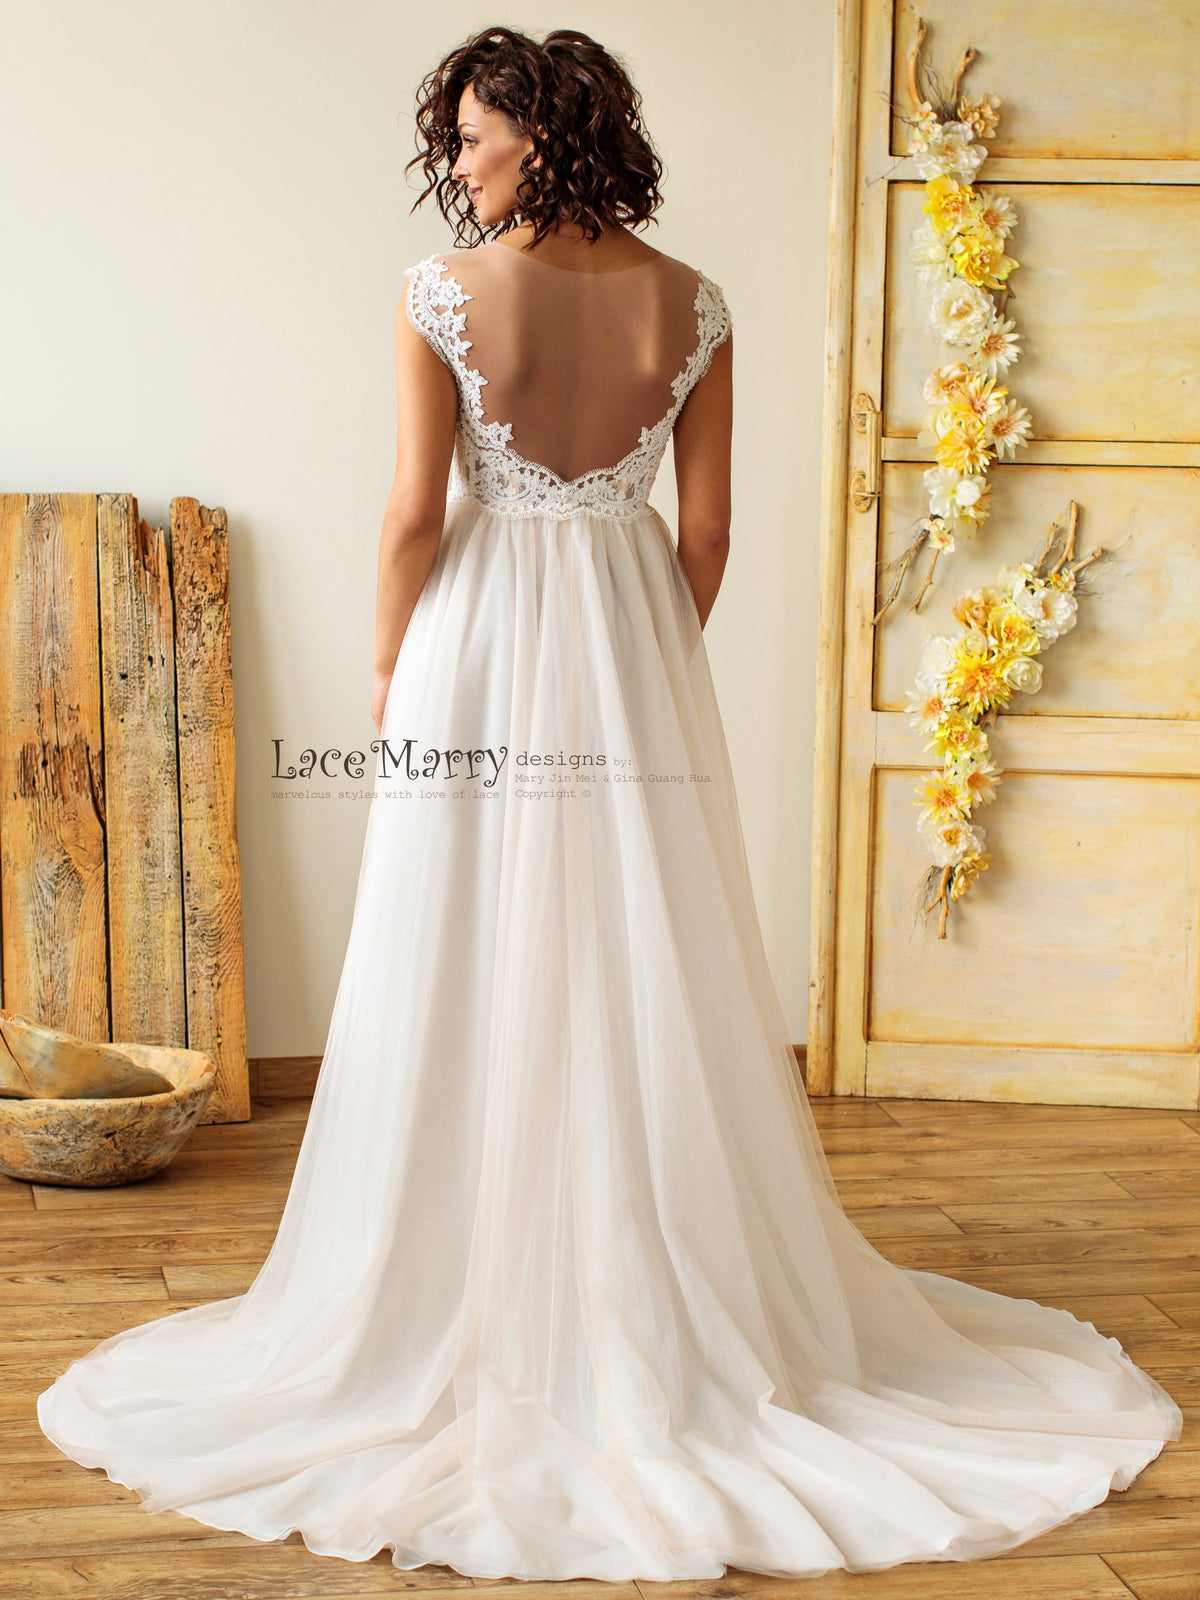 Illusion Open Back Wedding Dress with A Line Tulle Skirt